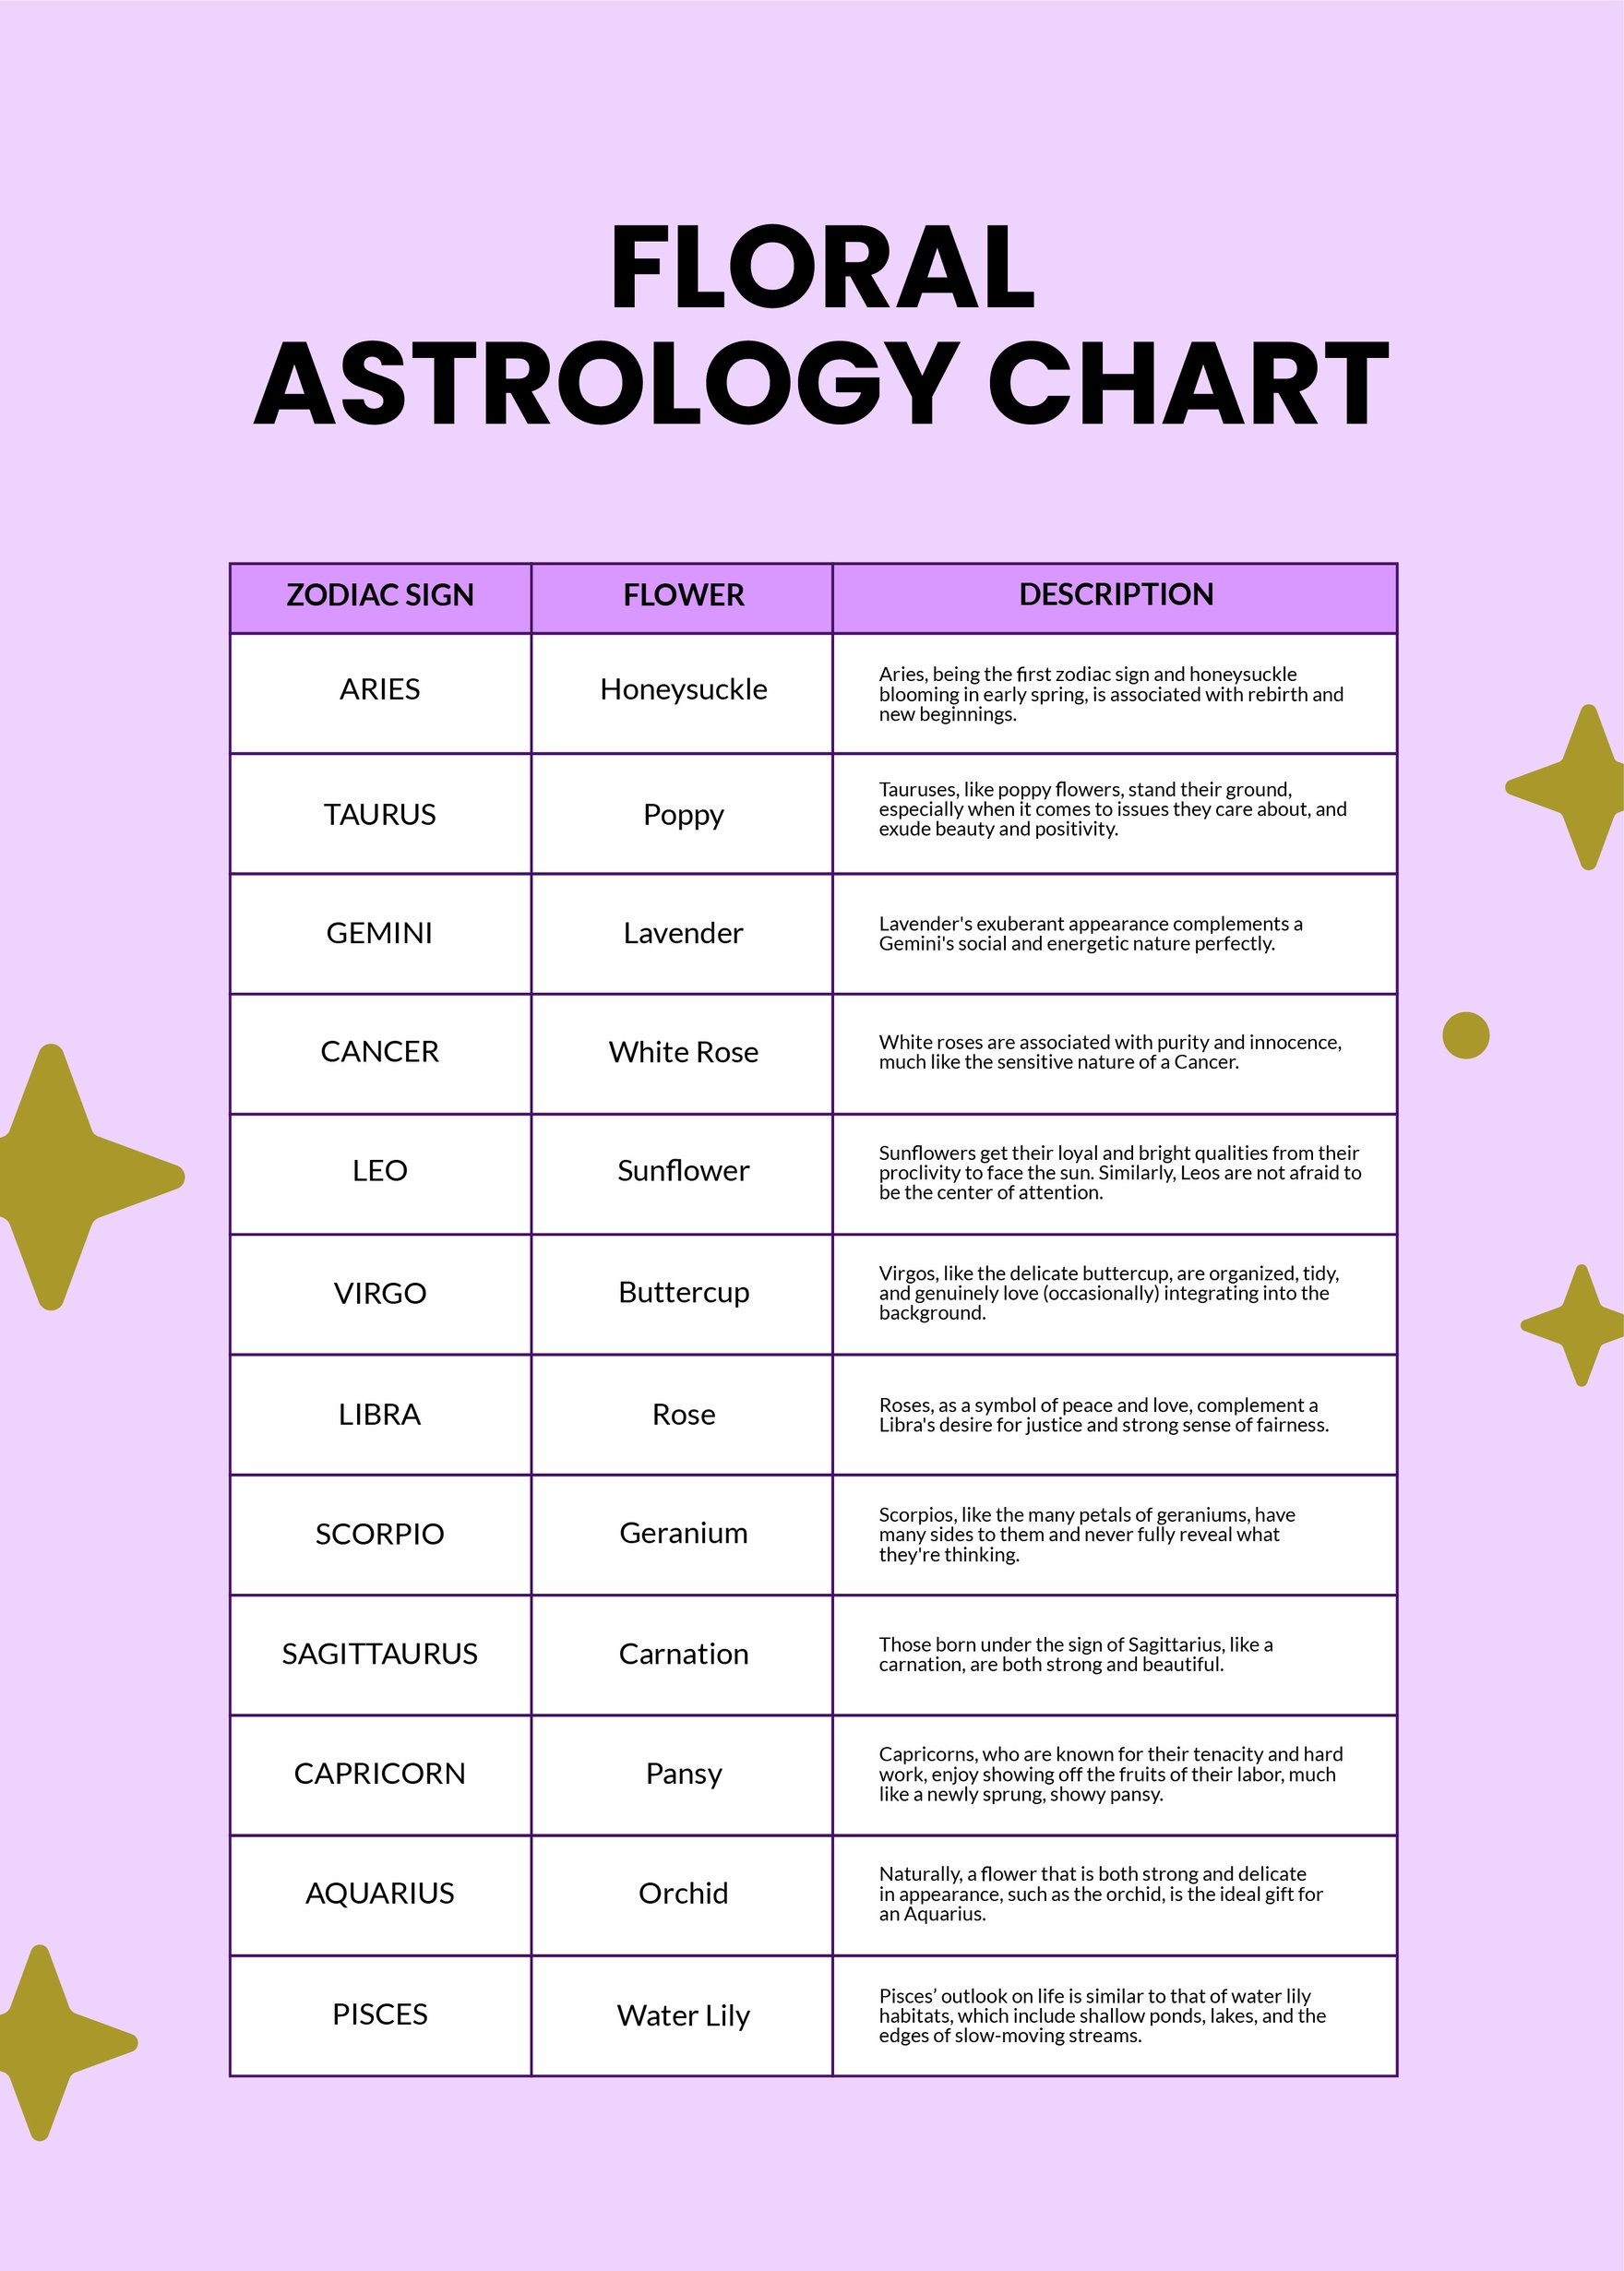 Floral Astrology Chart Template in PDF, Illustrator